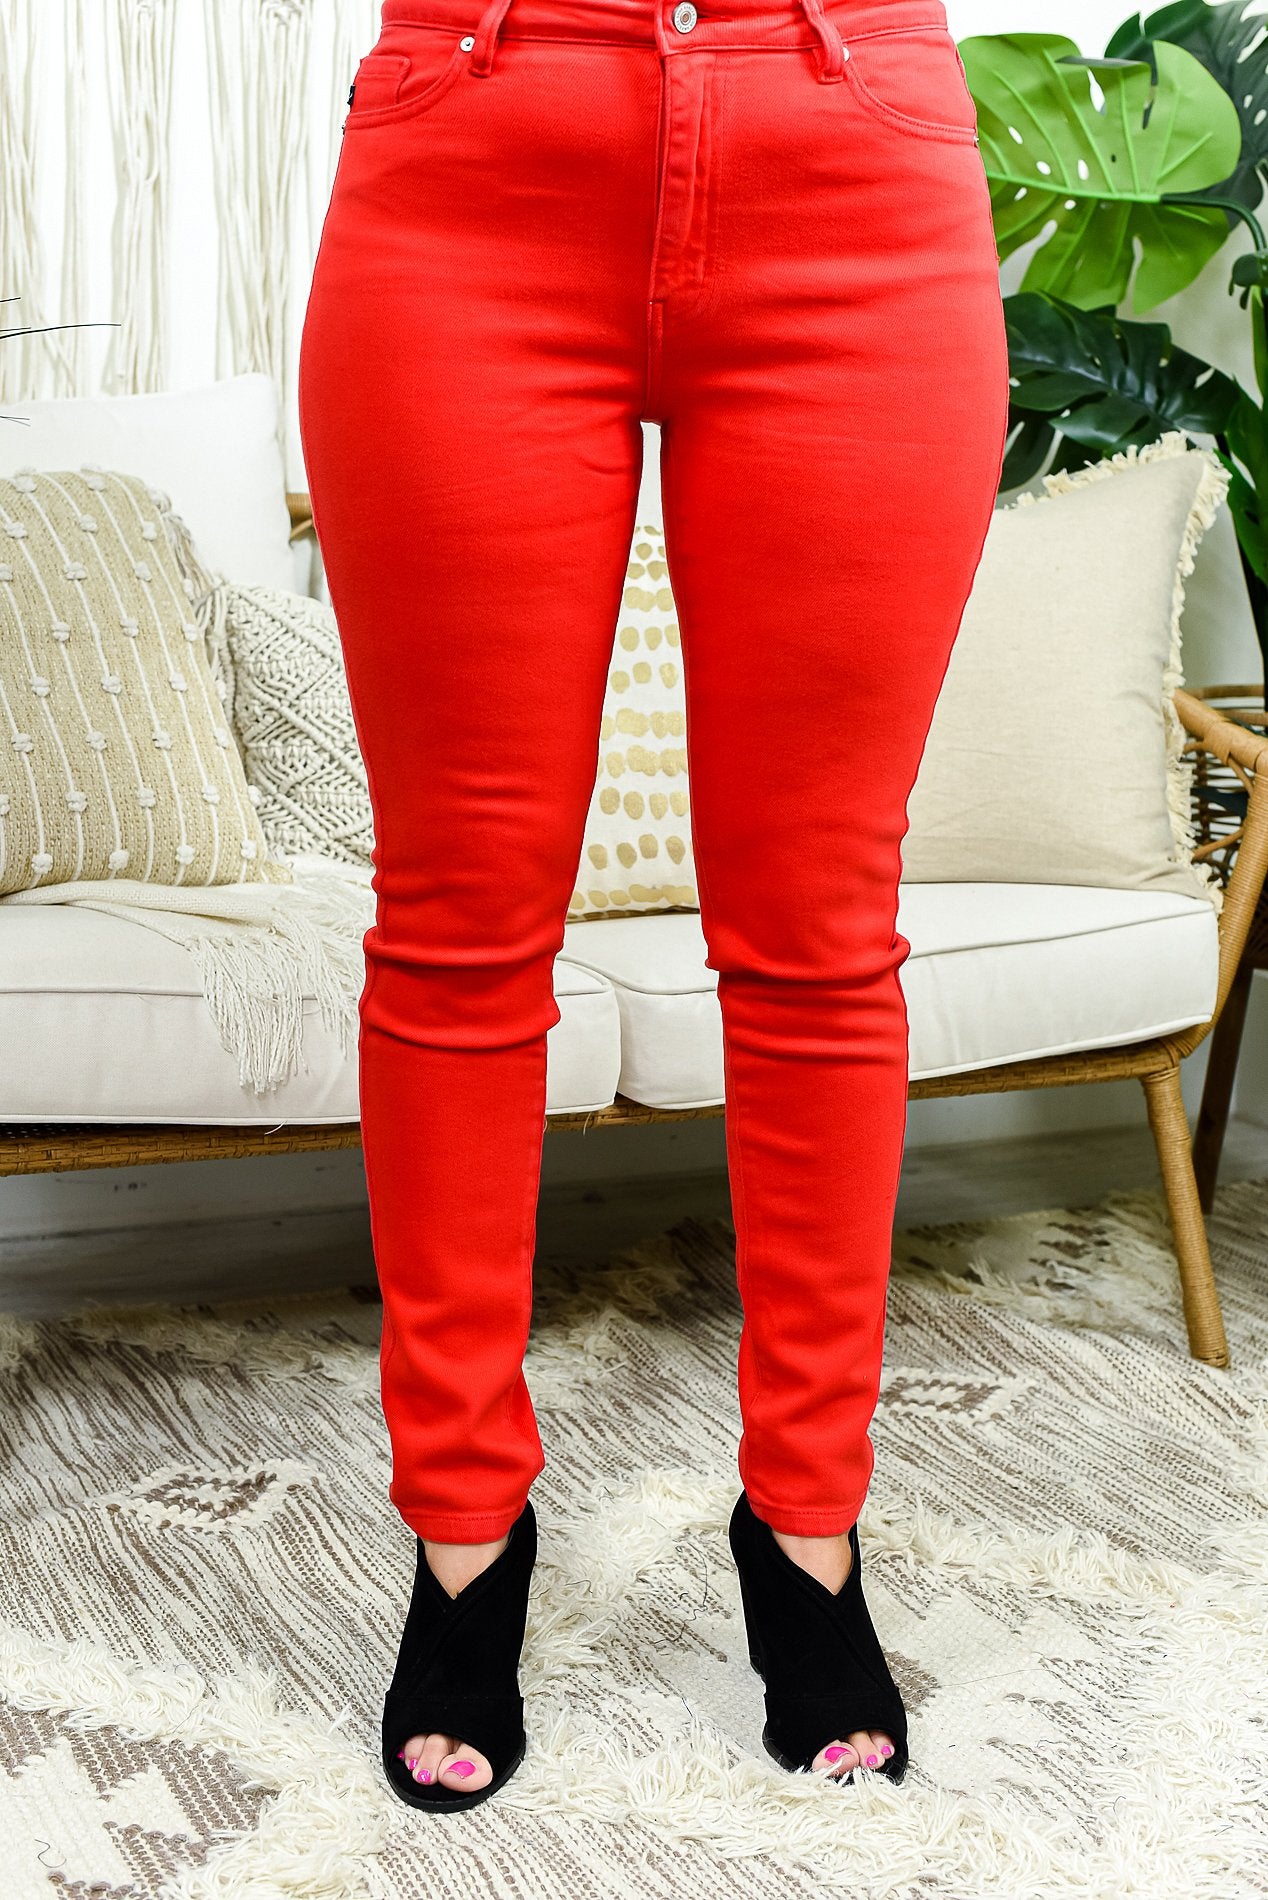 The New Look Red Jeans - K670RD